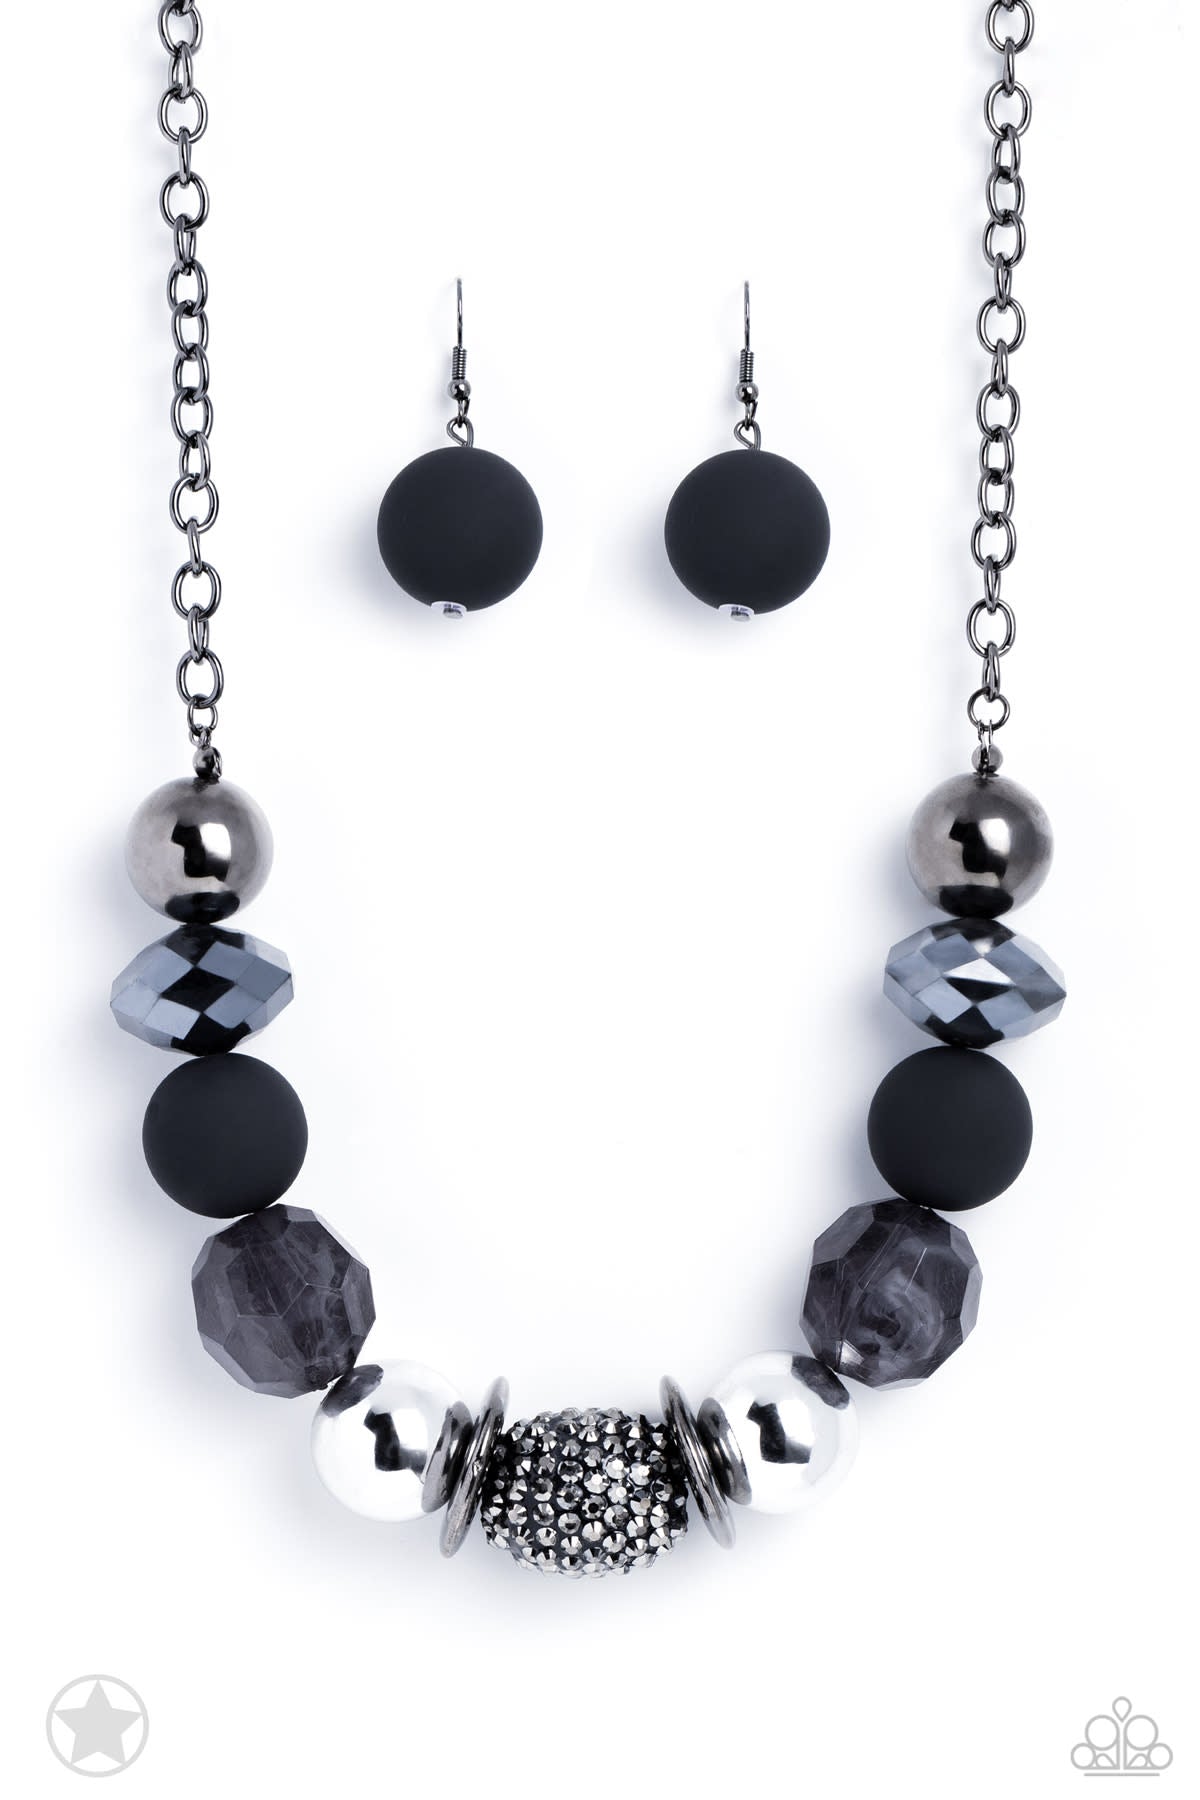 A Warm Welcome - Black Necklace Set Exclusive